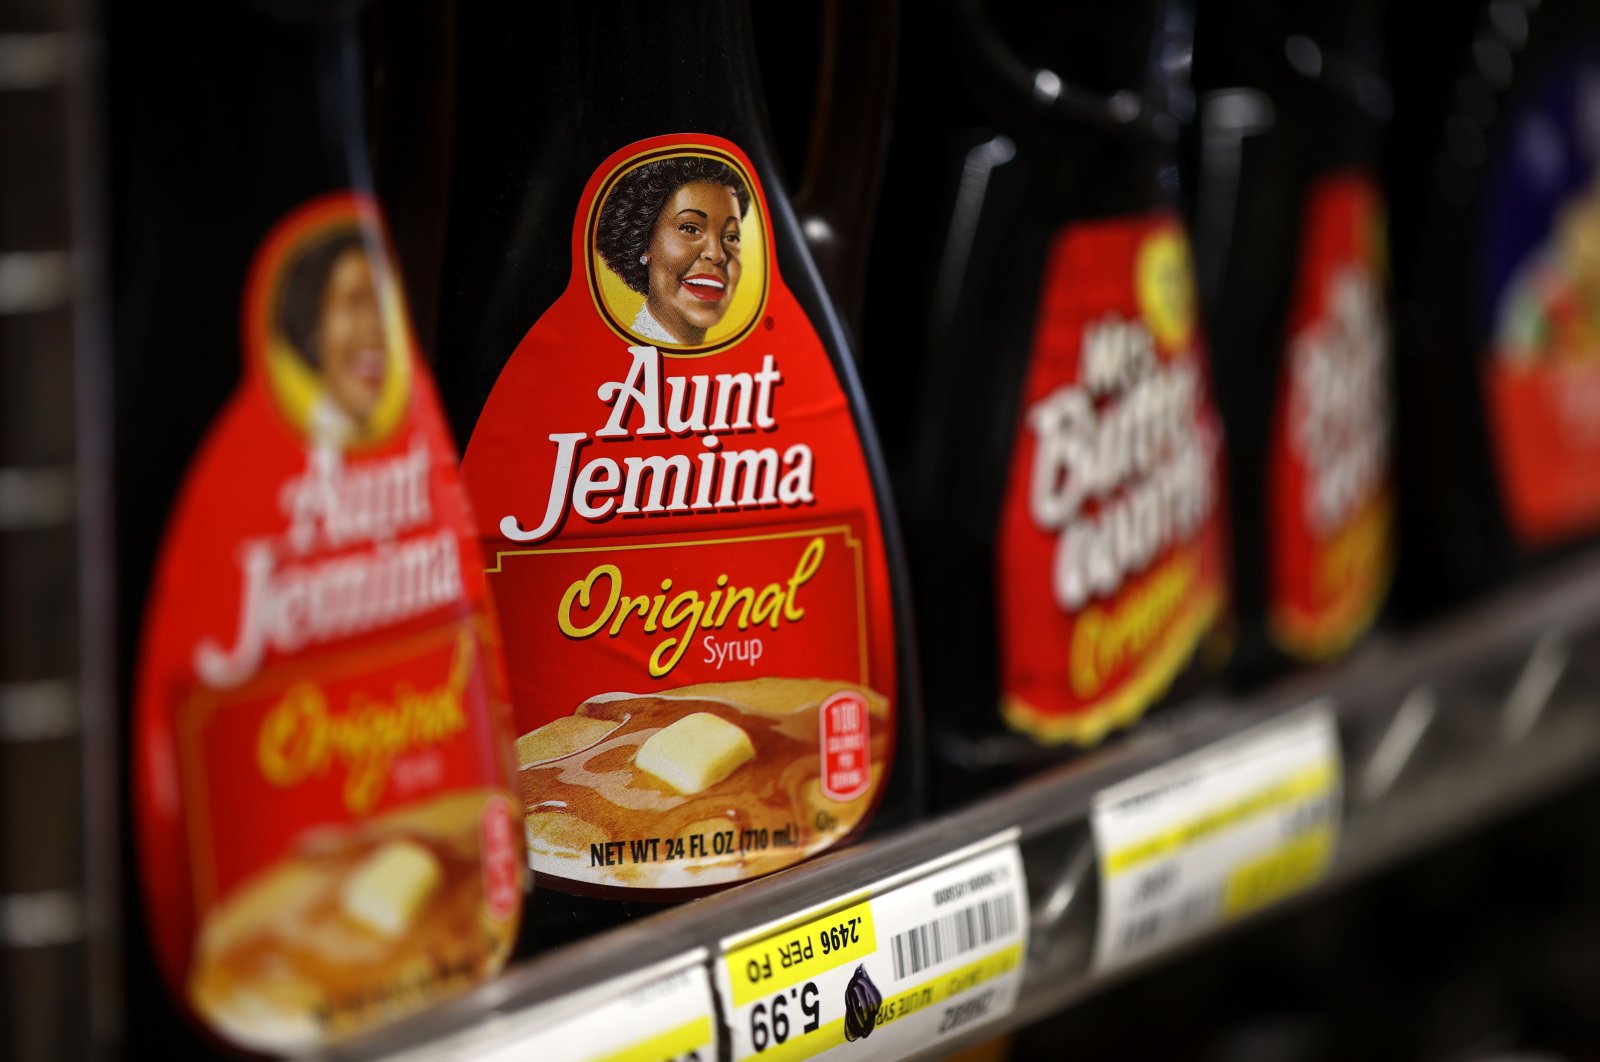 Bottles of Aunt Jemima pancake syrup are displayed on a shelf at Scotty's Market in San Rafael, California, U.S., June 17, 2020. (AFP Photo)